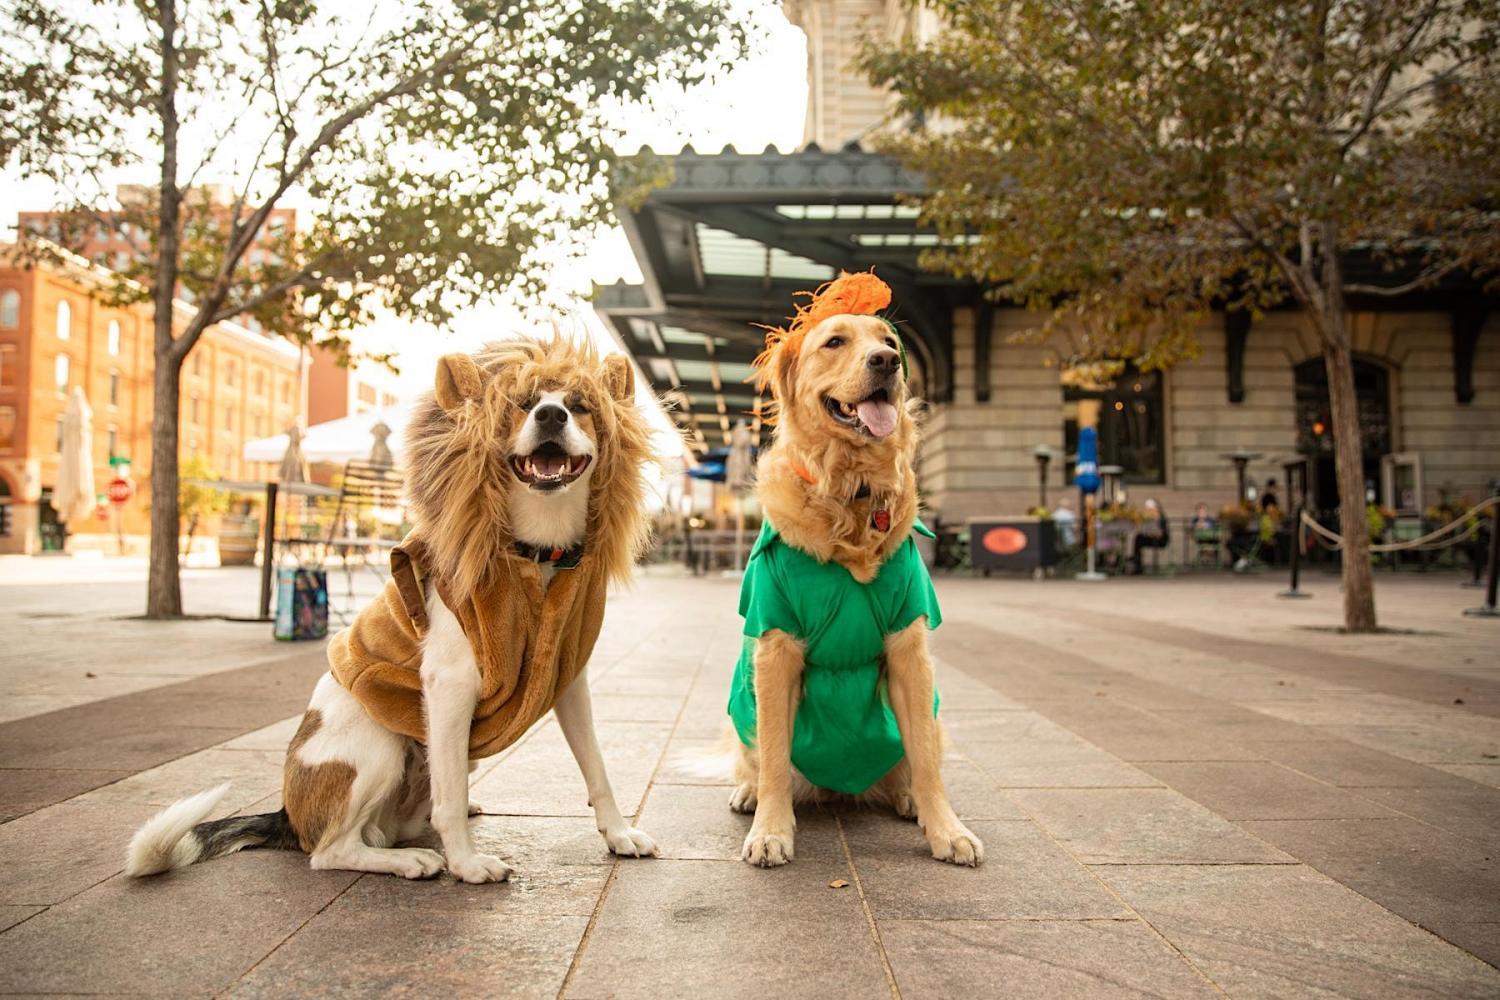 Howl-a-Ween Pet Parade at Denver Union Station
Mon Oct 24, 7:00 PM - Mon Oct 24, 7:00 PM
in 4 days